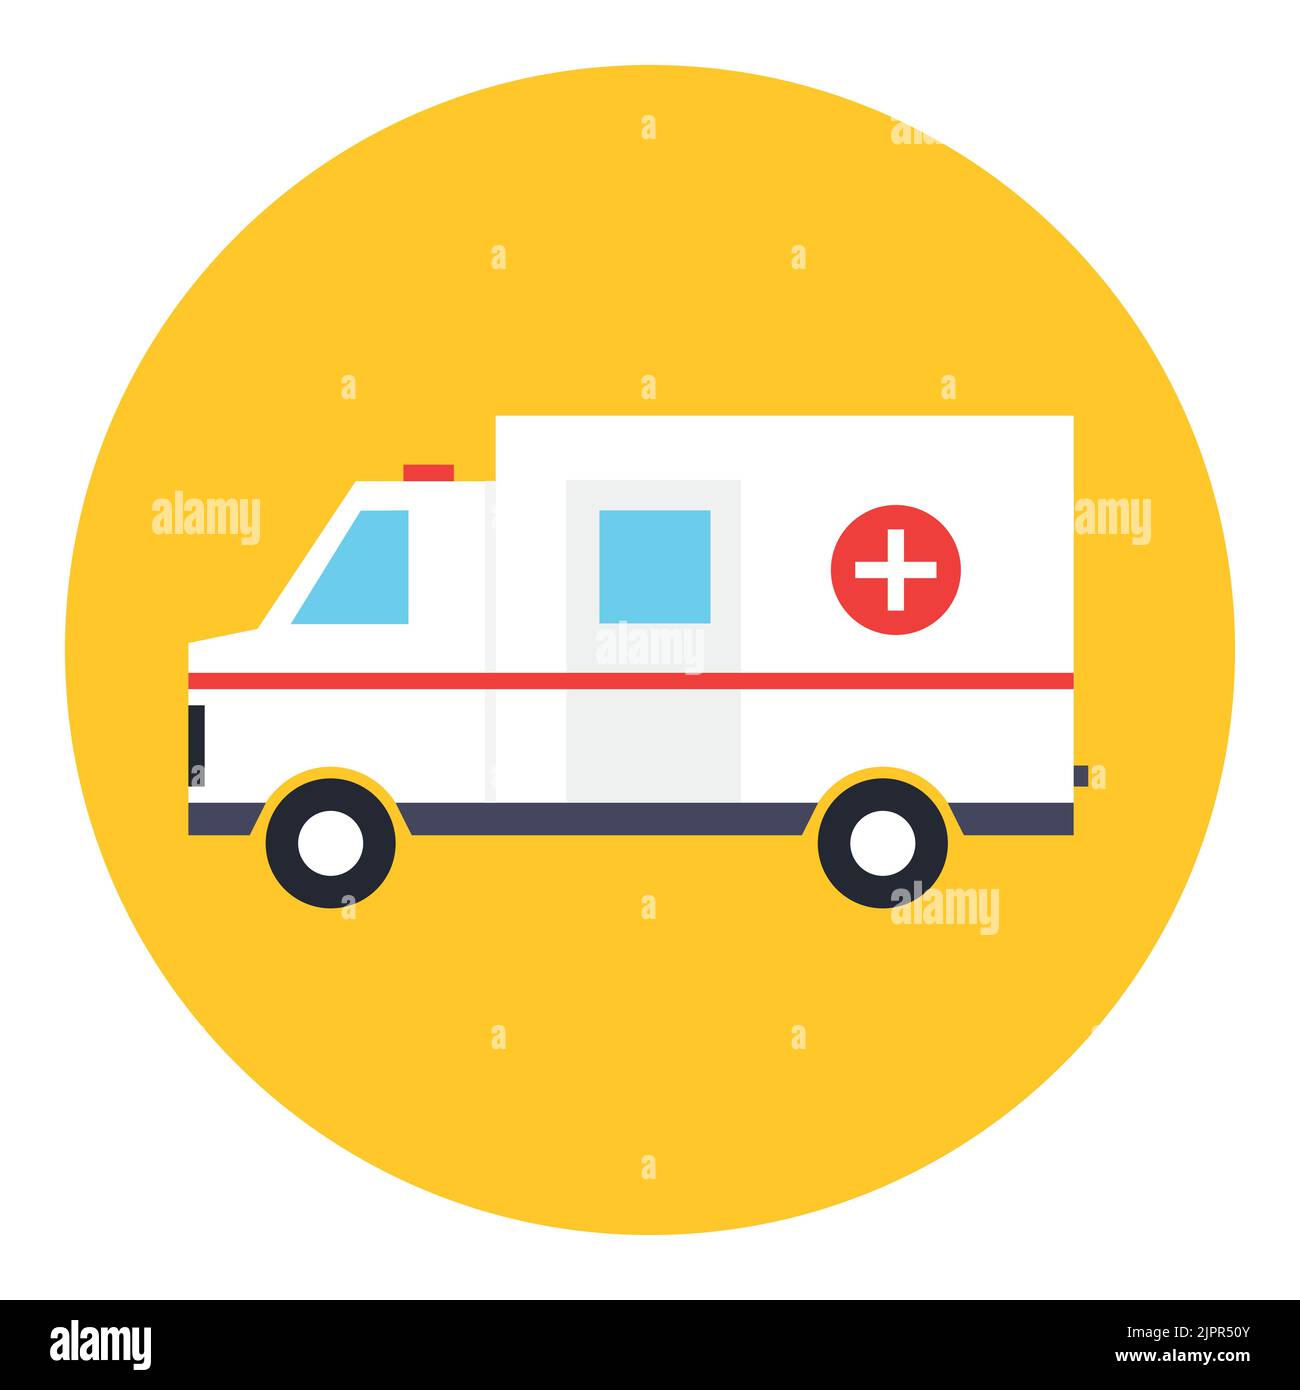 Ambulance car icon. Emergency medical service bus. Cartoon style ambulance car icon. First aid medical flat style icon isolated on white background Stock Vector